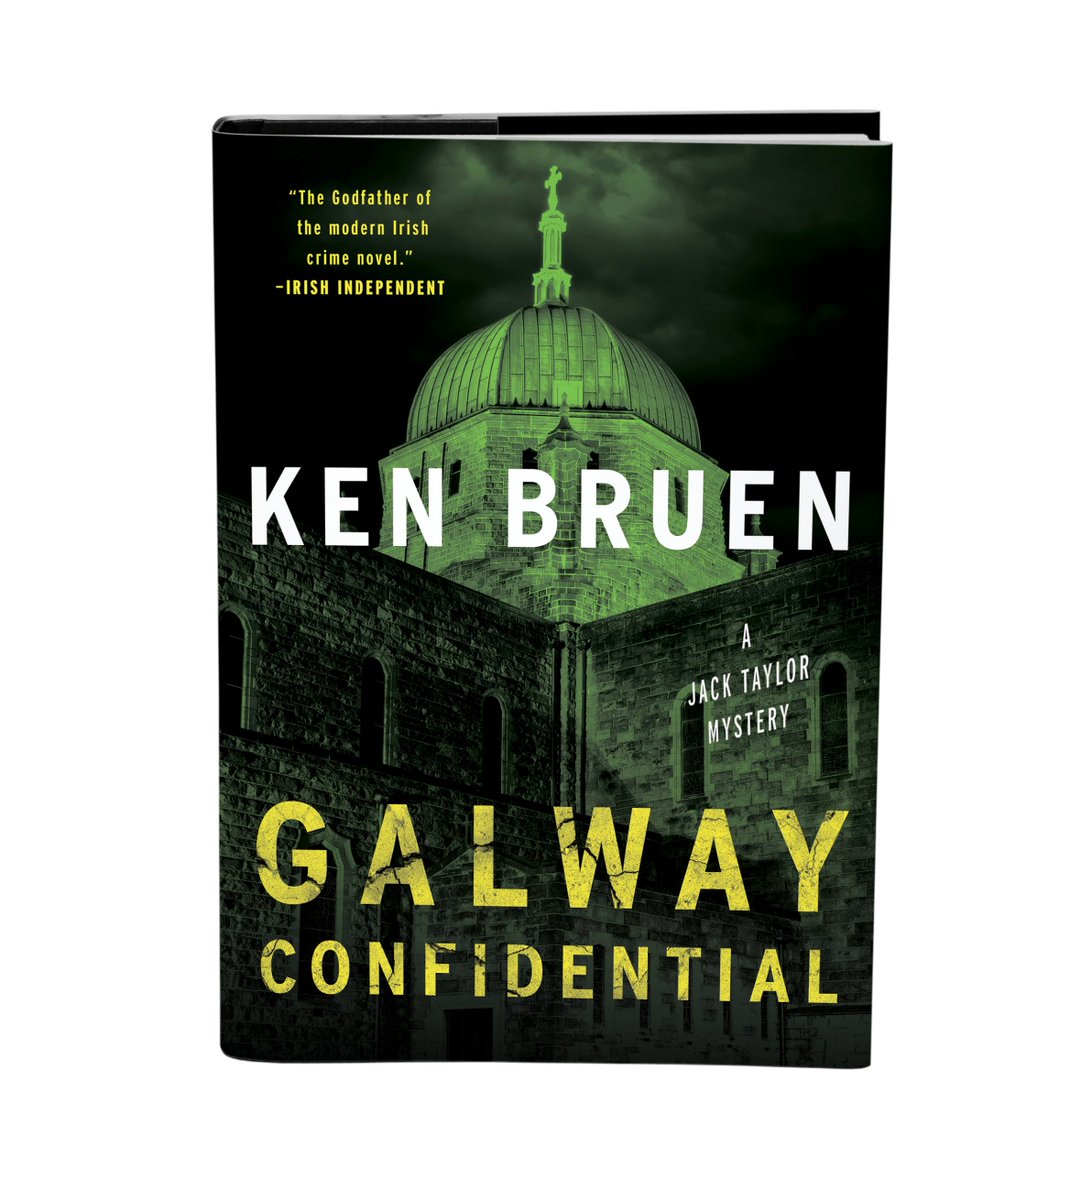 Celebrate #StPatricksDay this weekend with a new mystery from 'The Godfather of the Irish Crime Novel': Ken Bruen's GALWAY CONFIDENTIAL